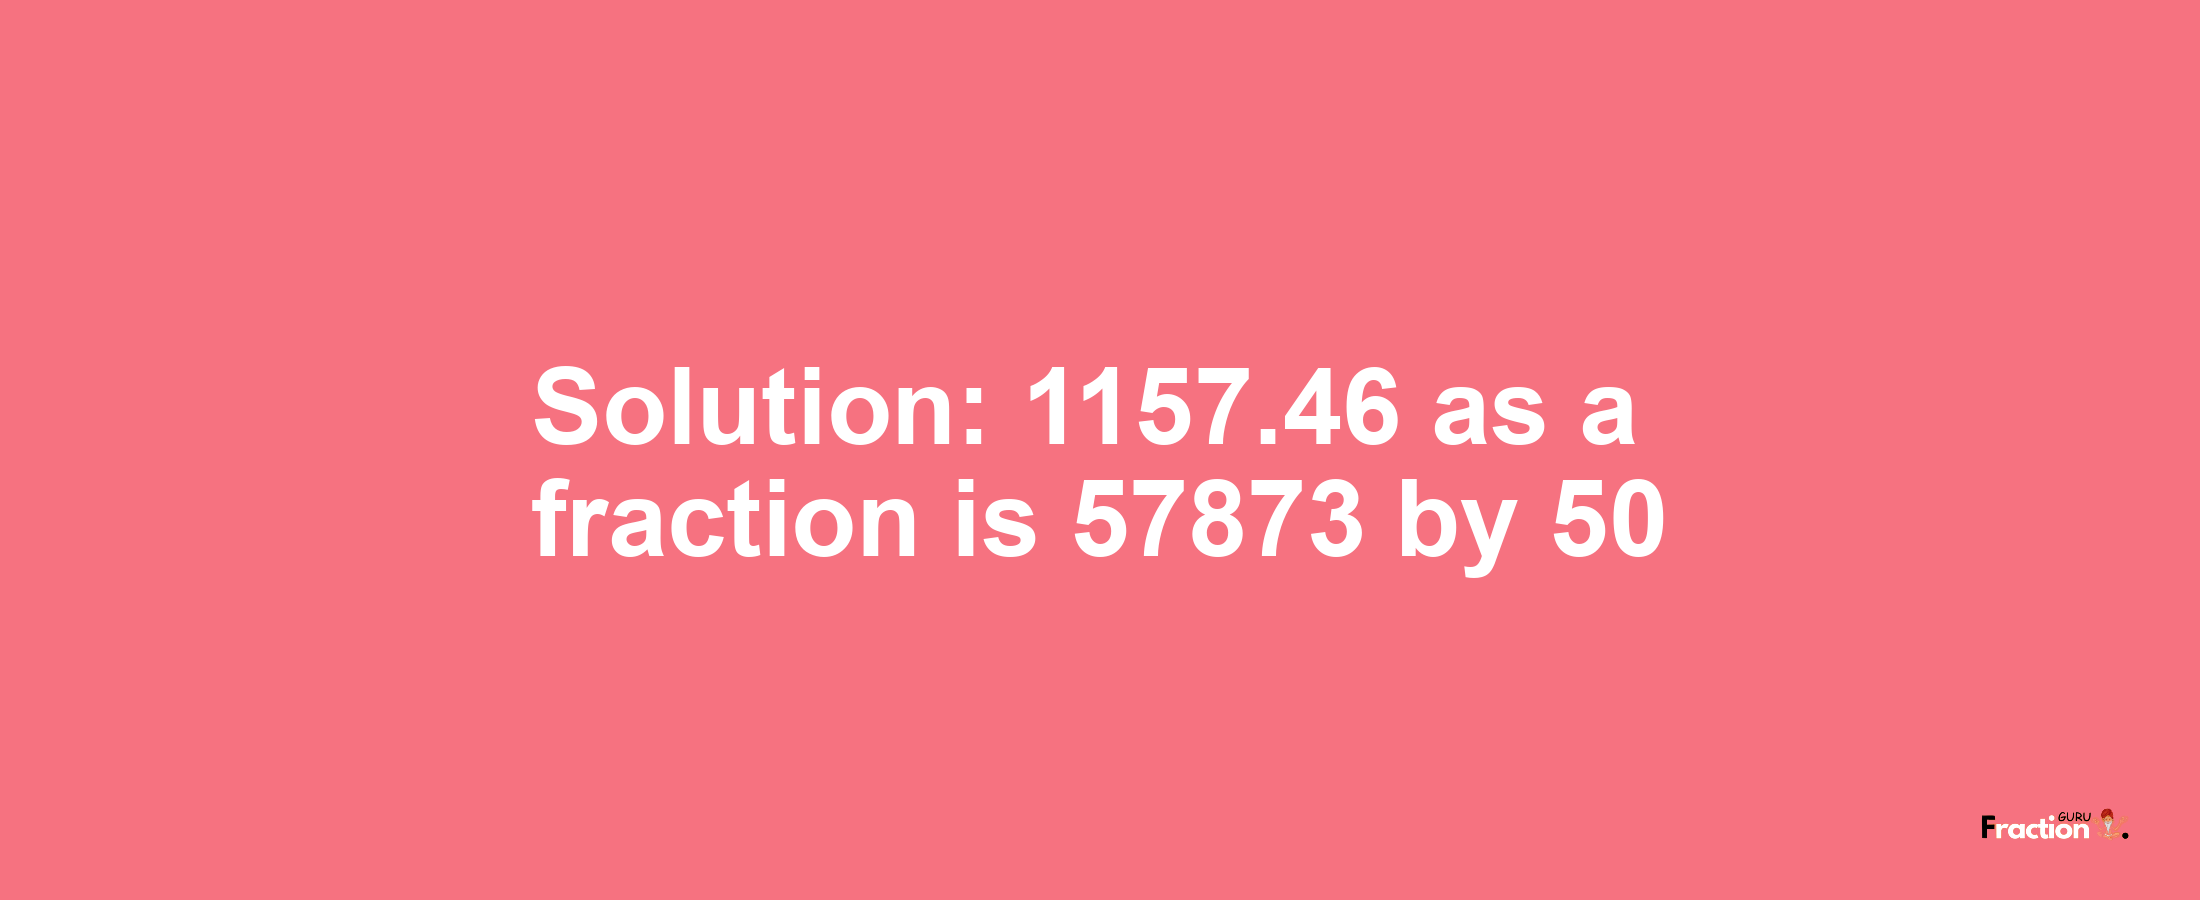 Solution:1157.46 as a fraction is 57873/50